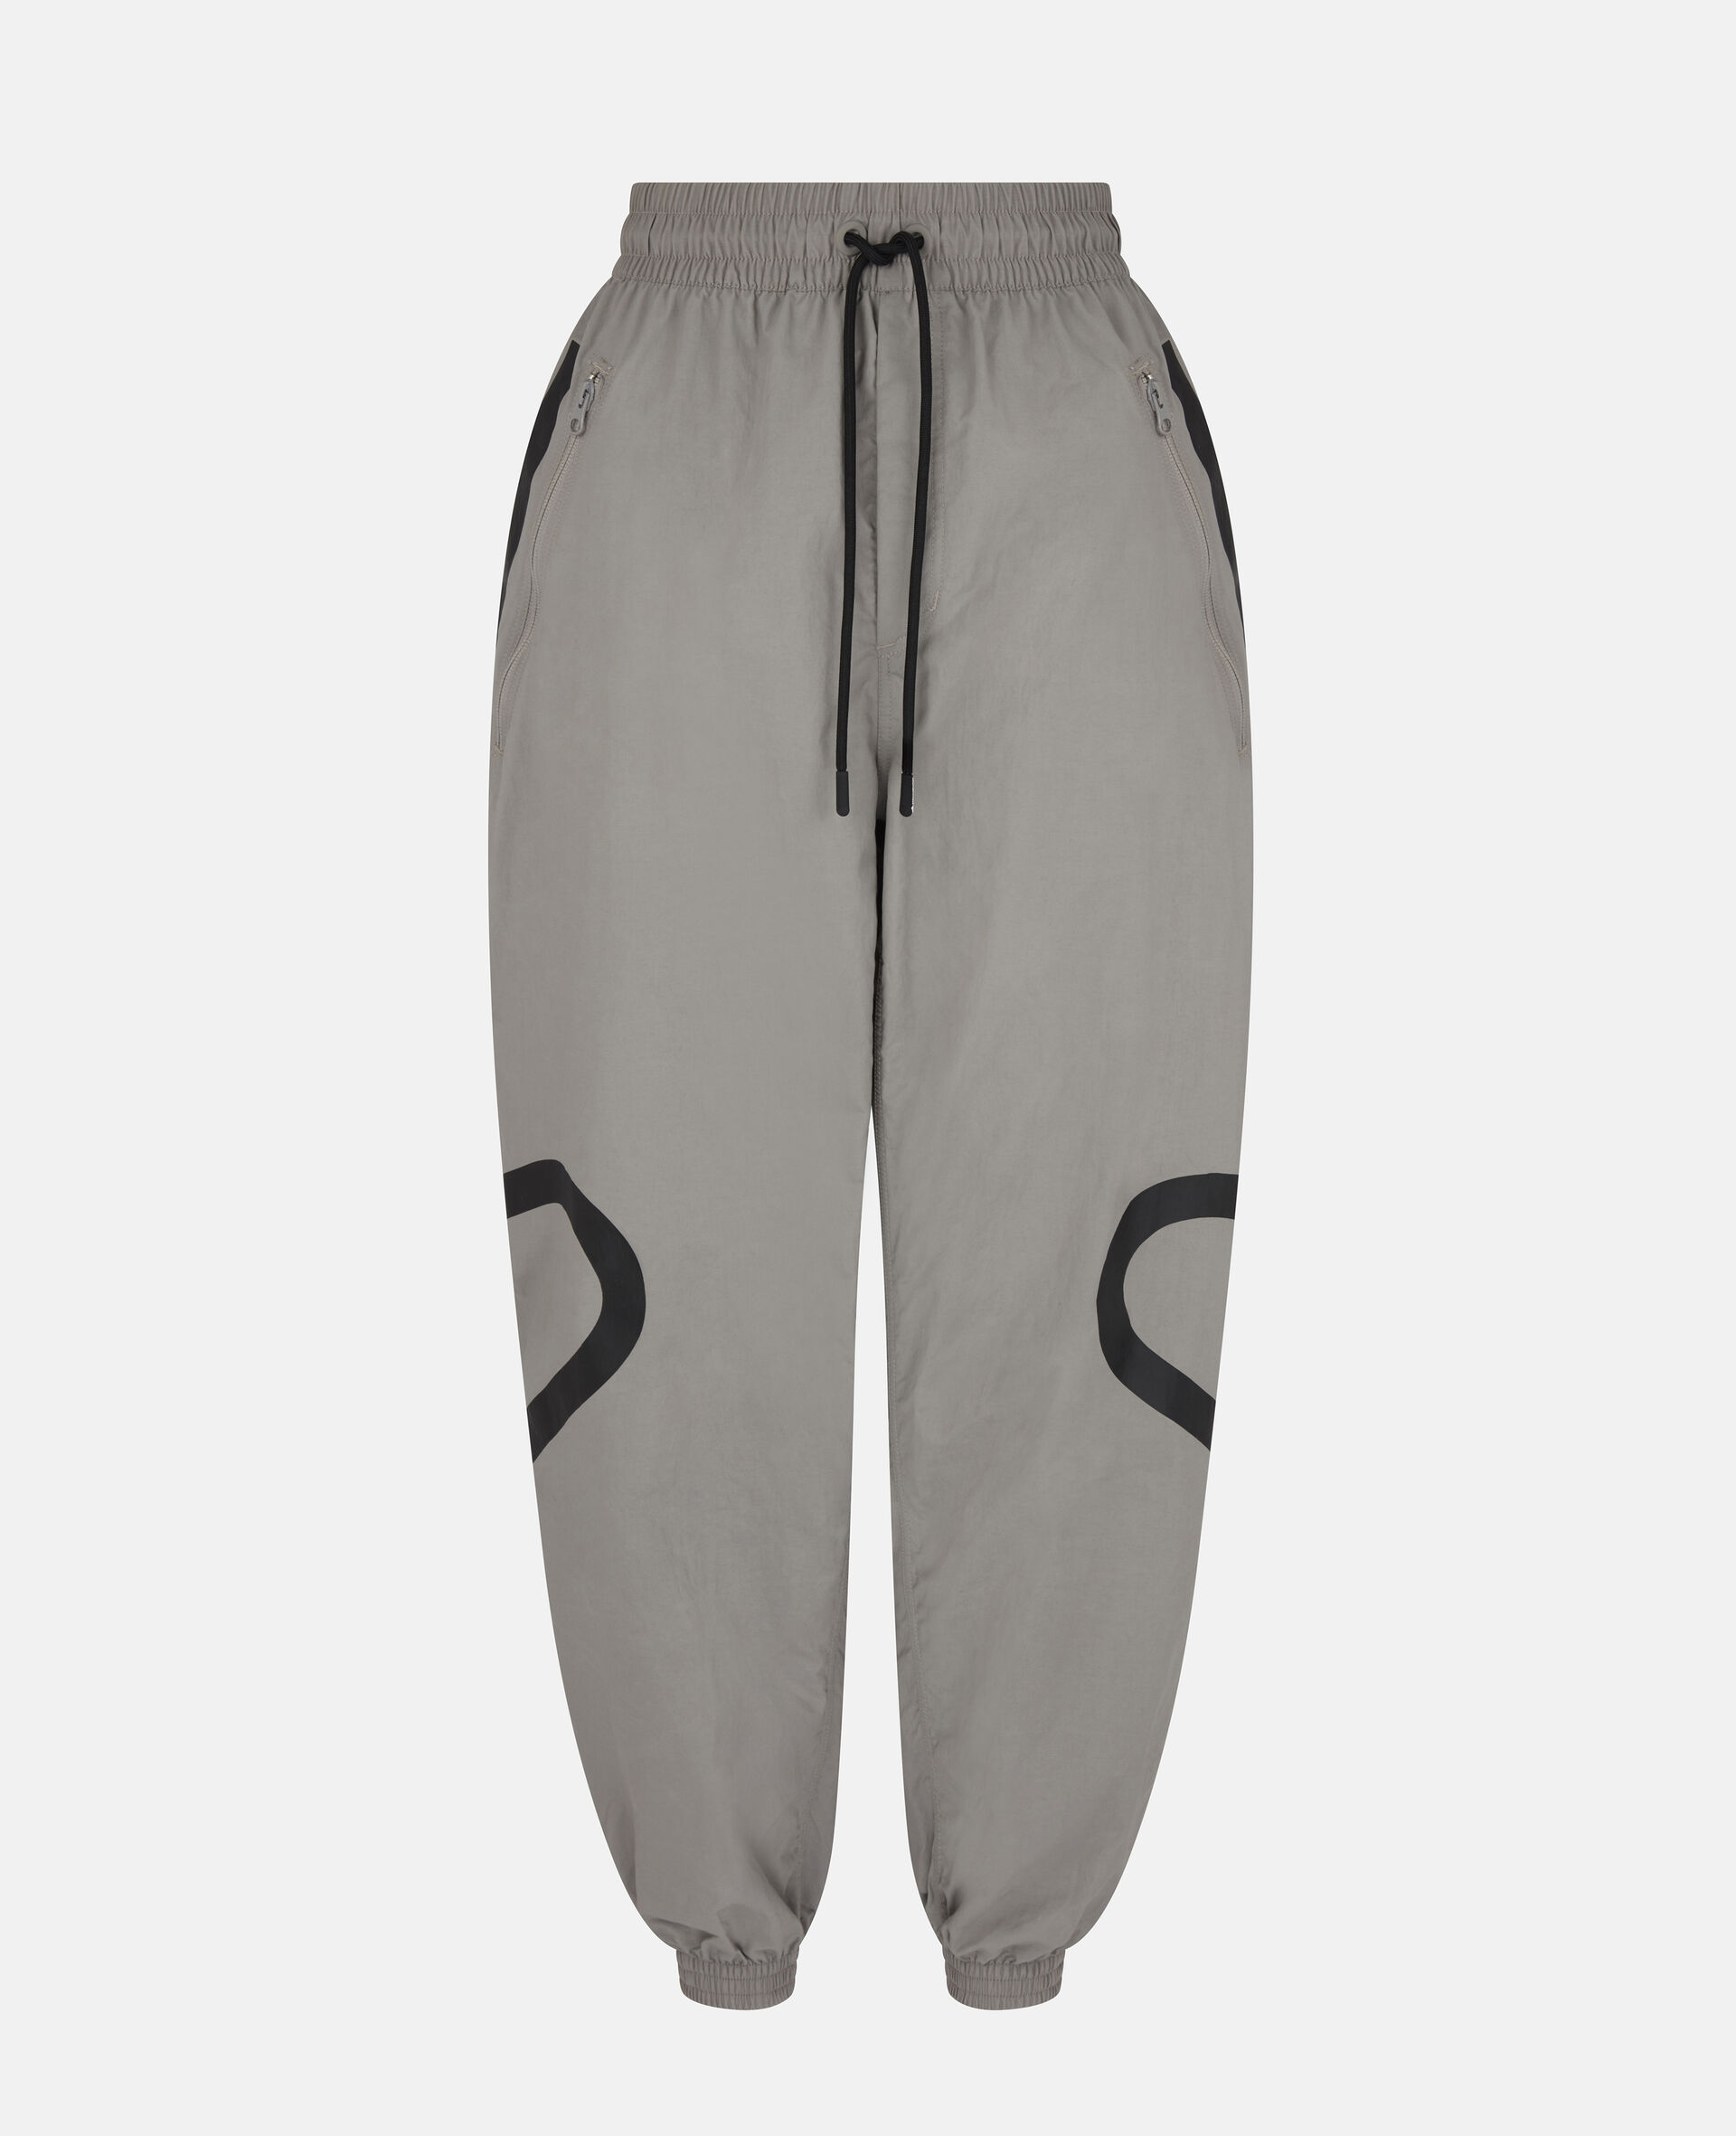 Grey Training Trousers-Grey-large image number 0